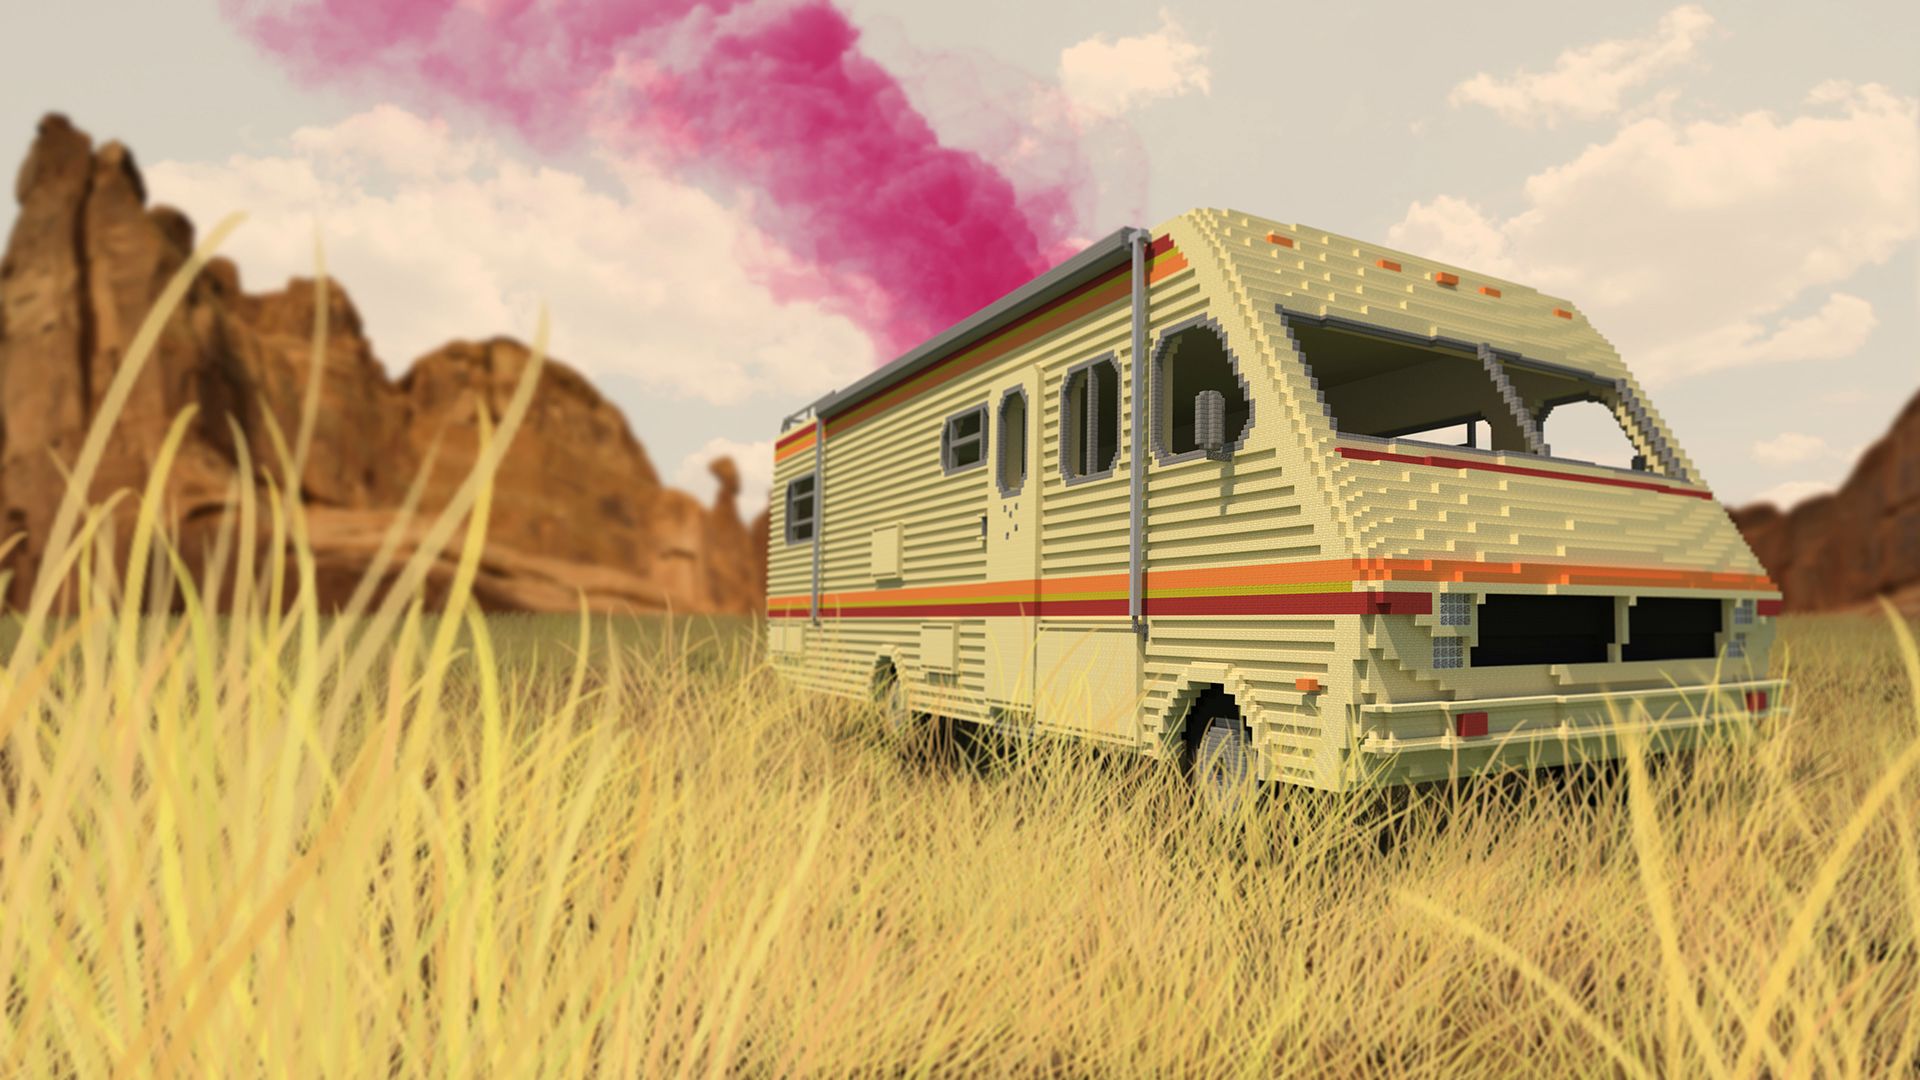 breaking bad rv 1080P 2k 4k HD wallpapers backgrounds free download   Rare Gallery